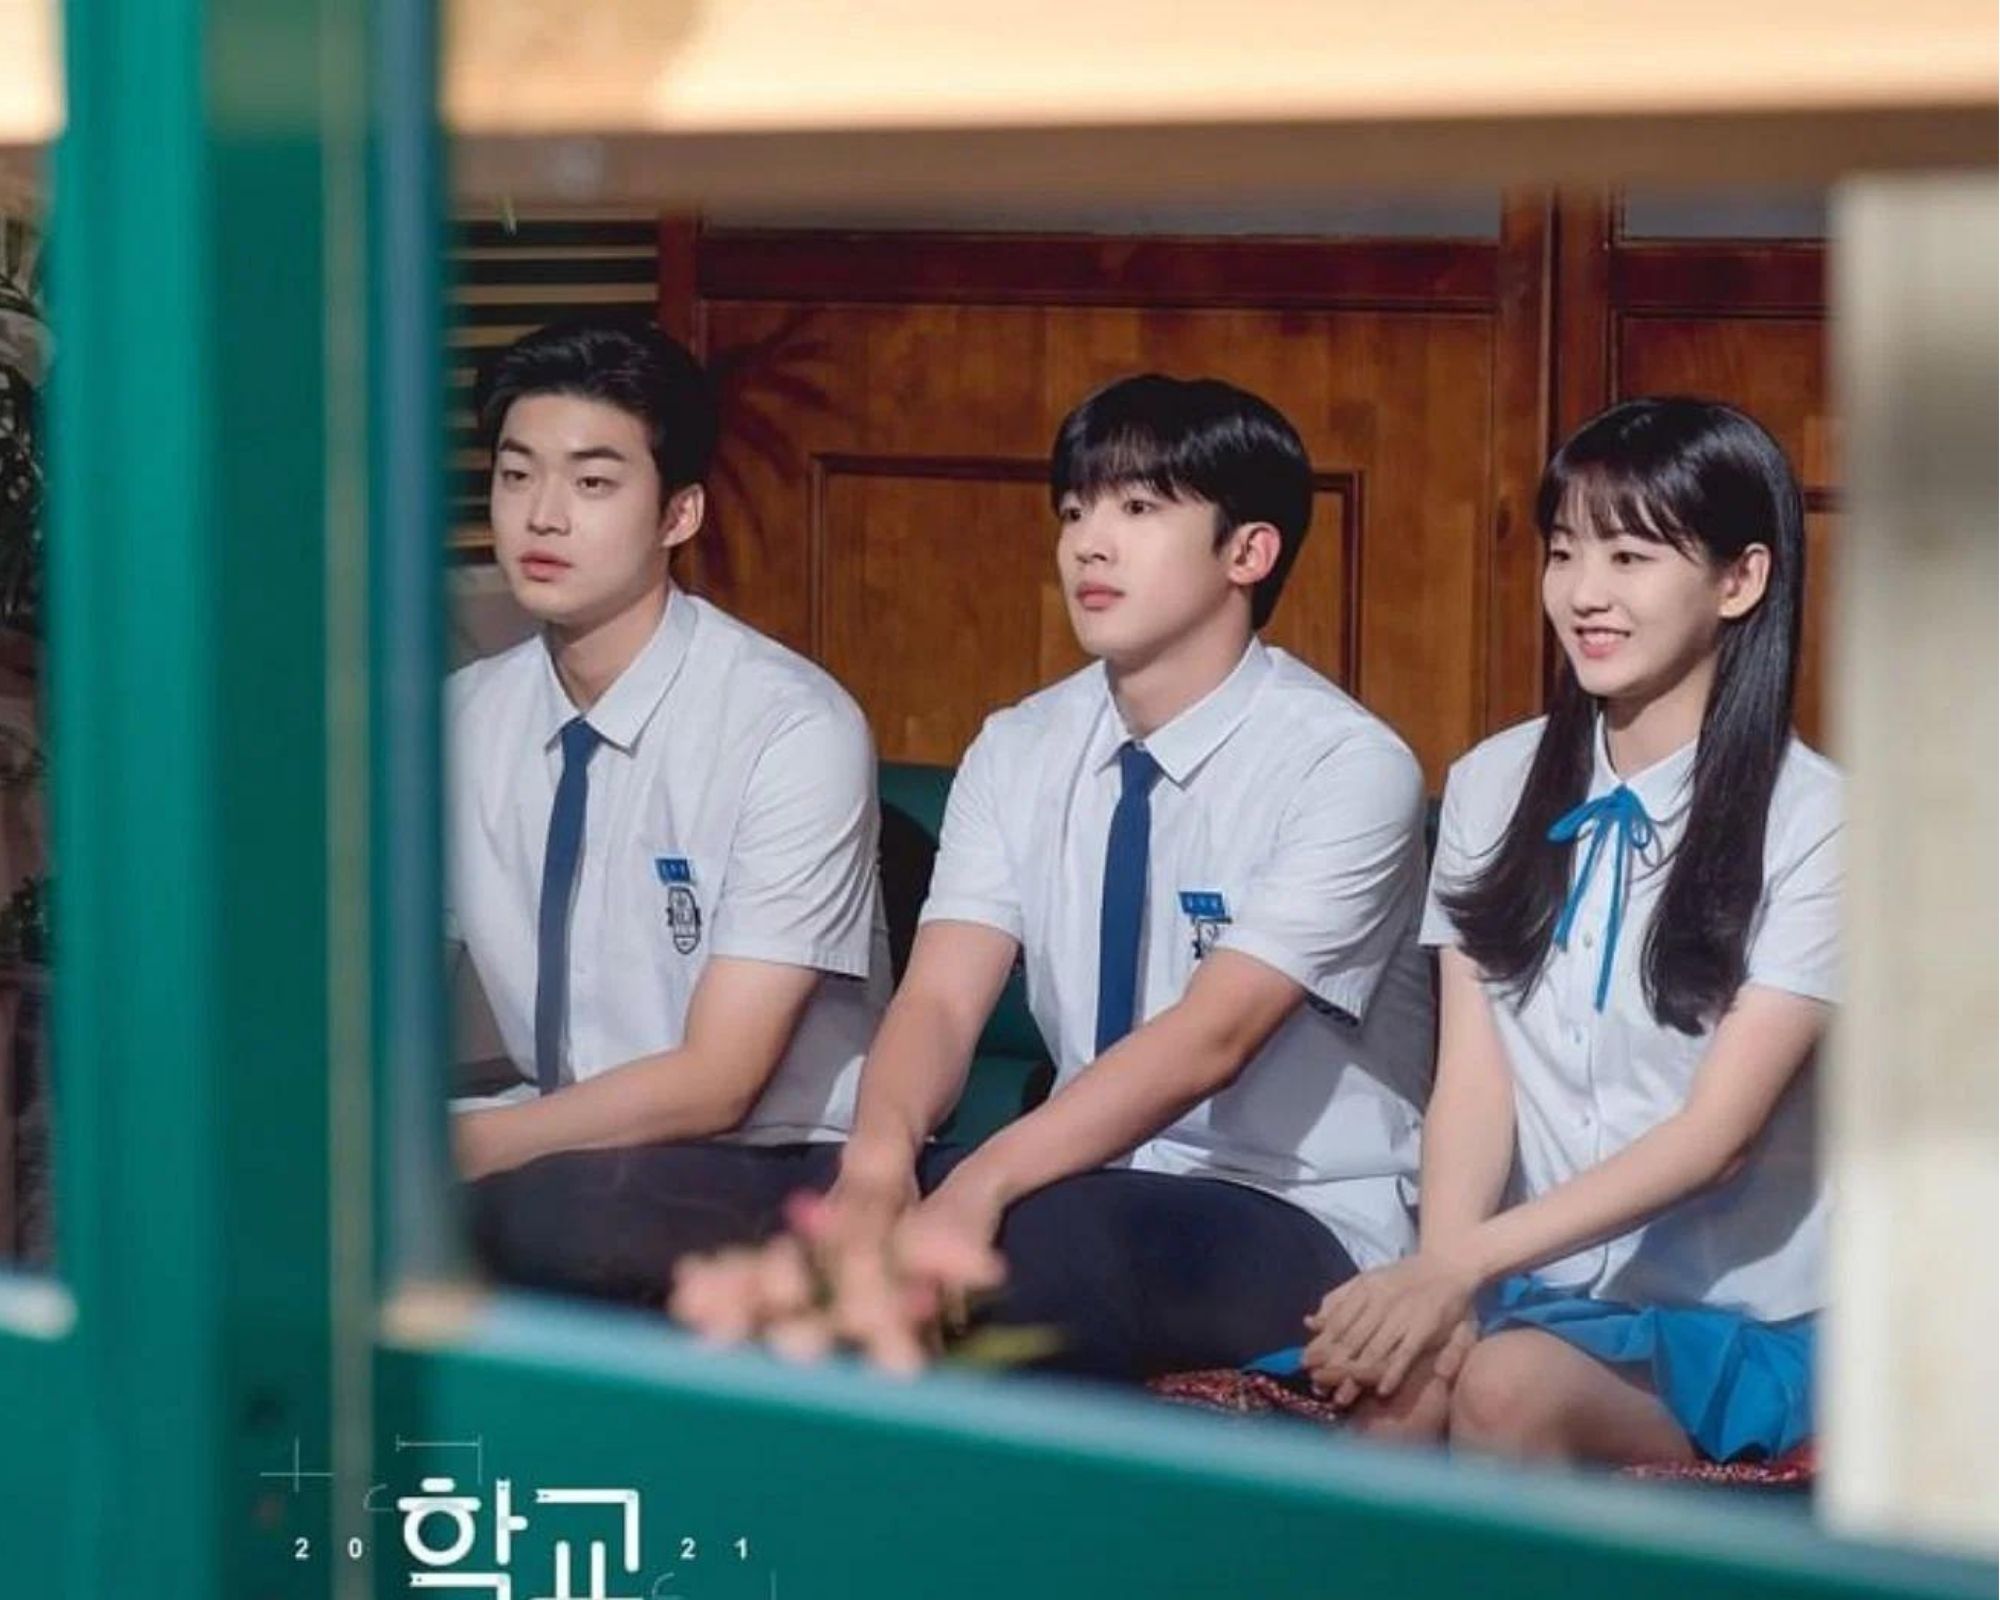 School 2021 - Unspoiled Review